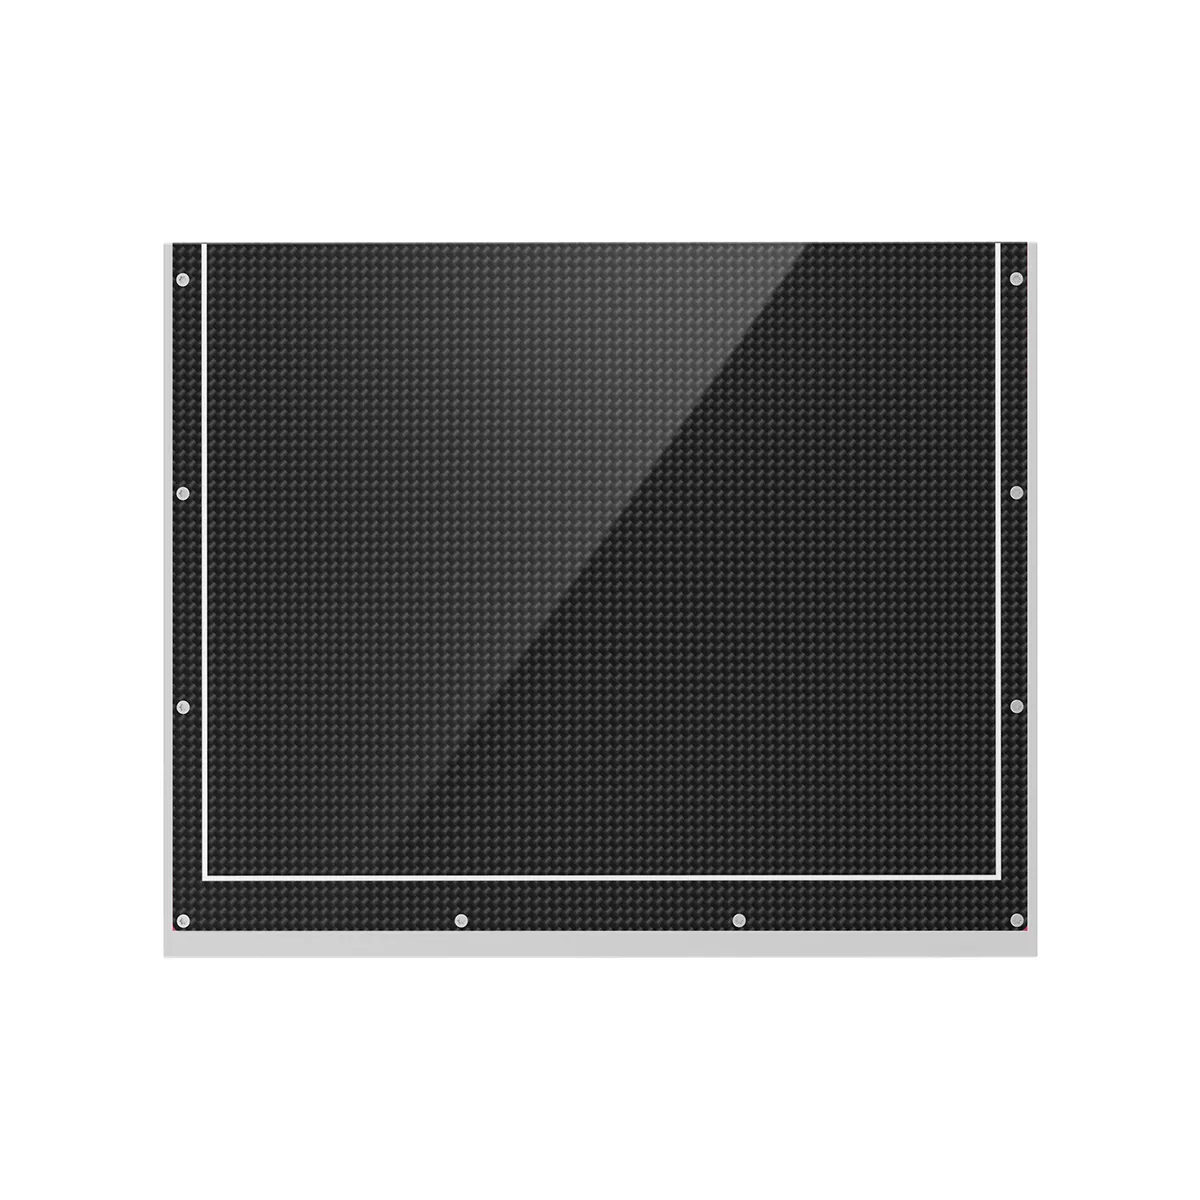 Cheap 10*12-inch mammographic Flat Panel Detector